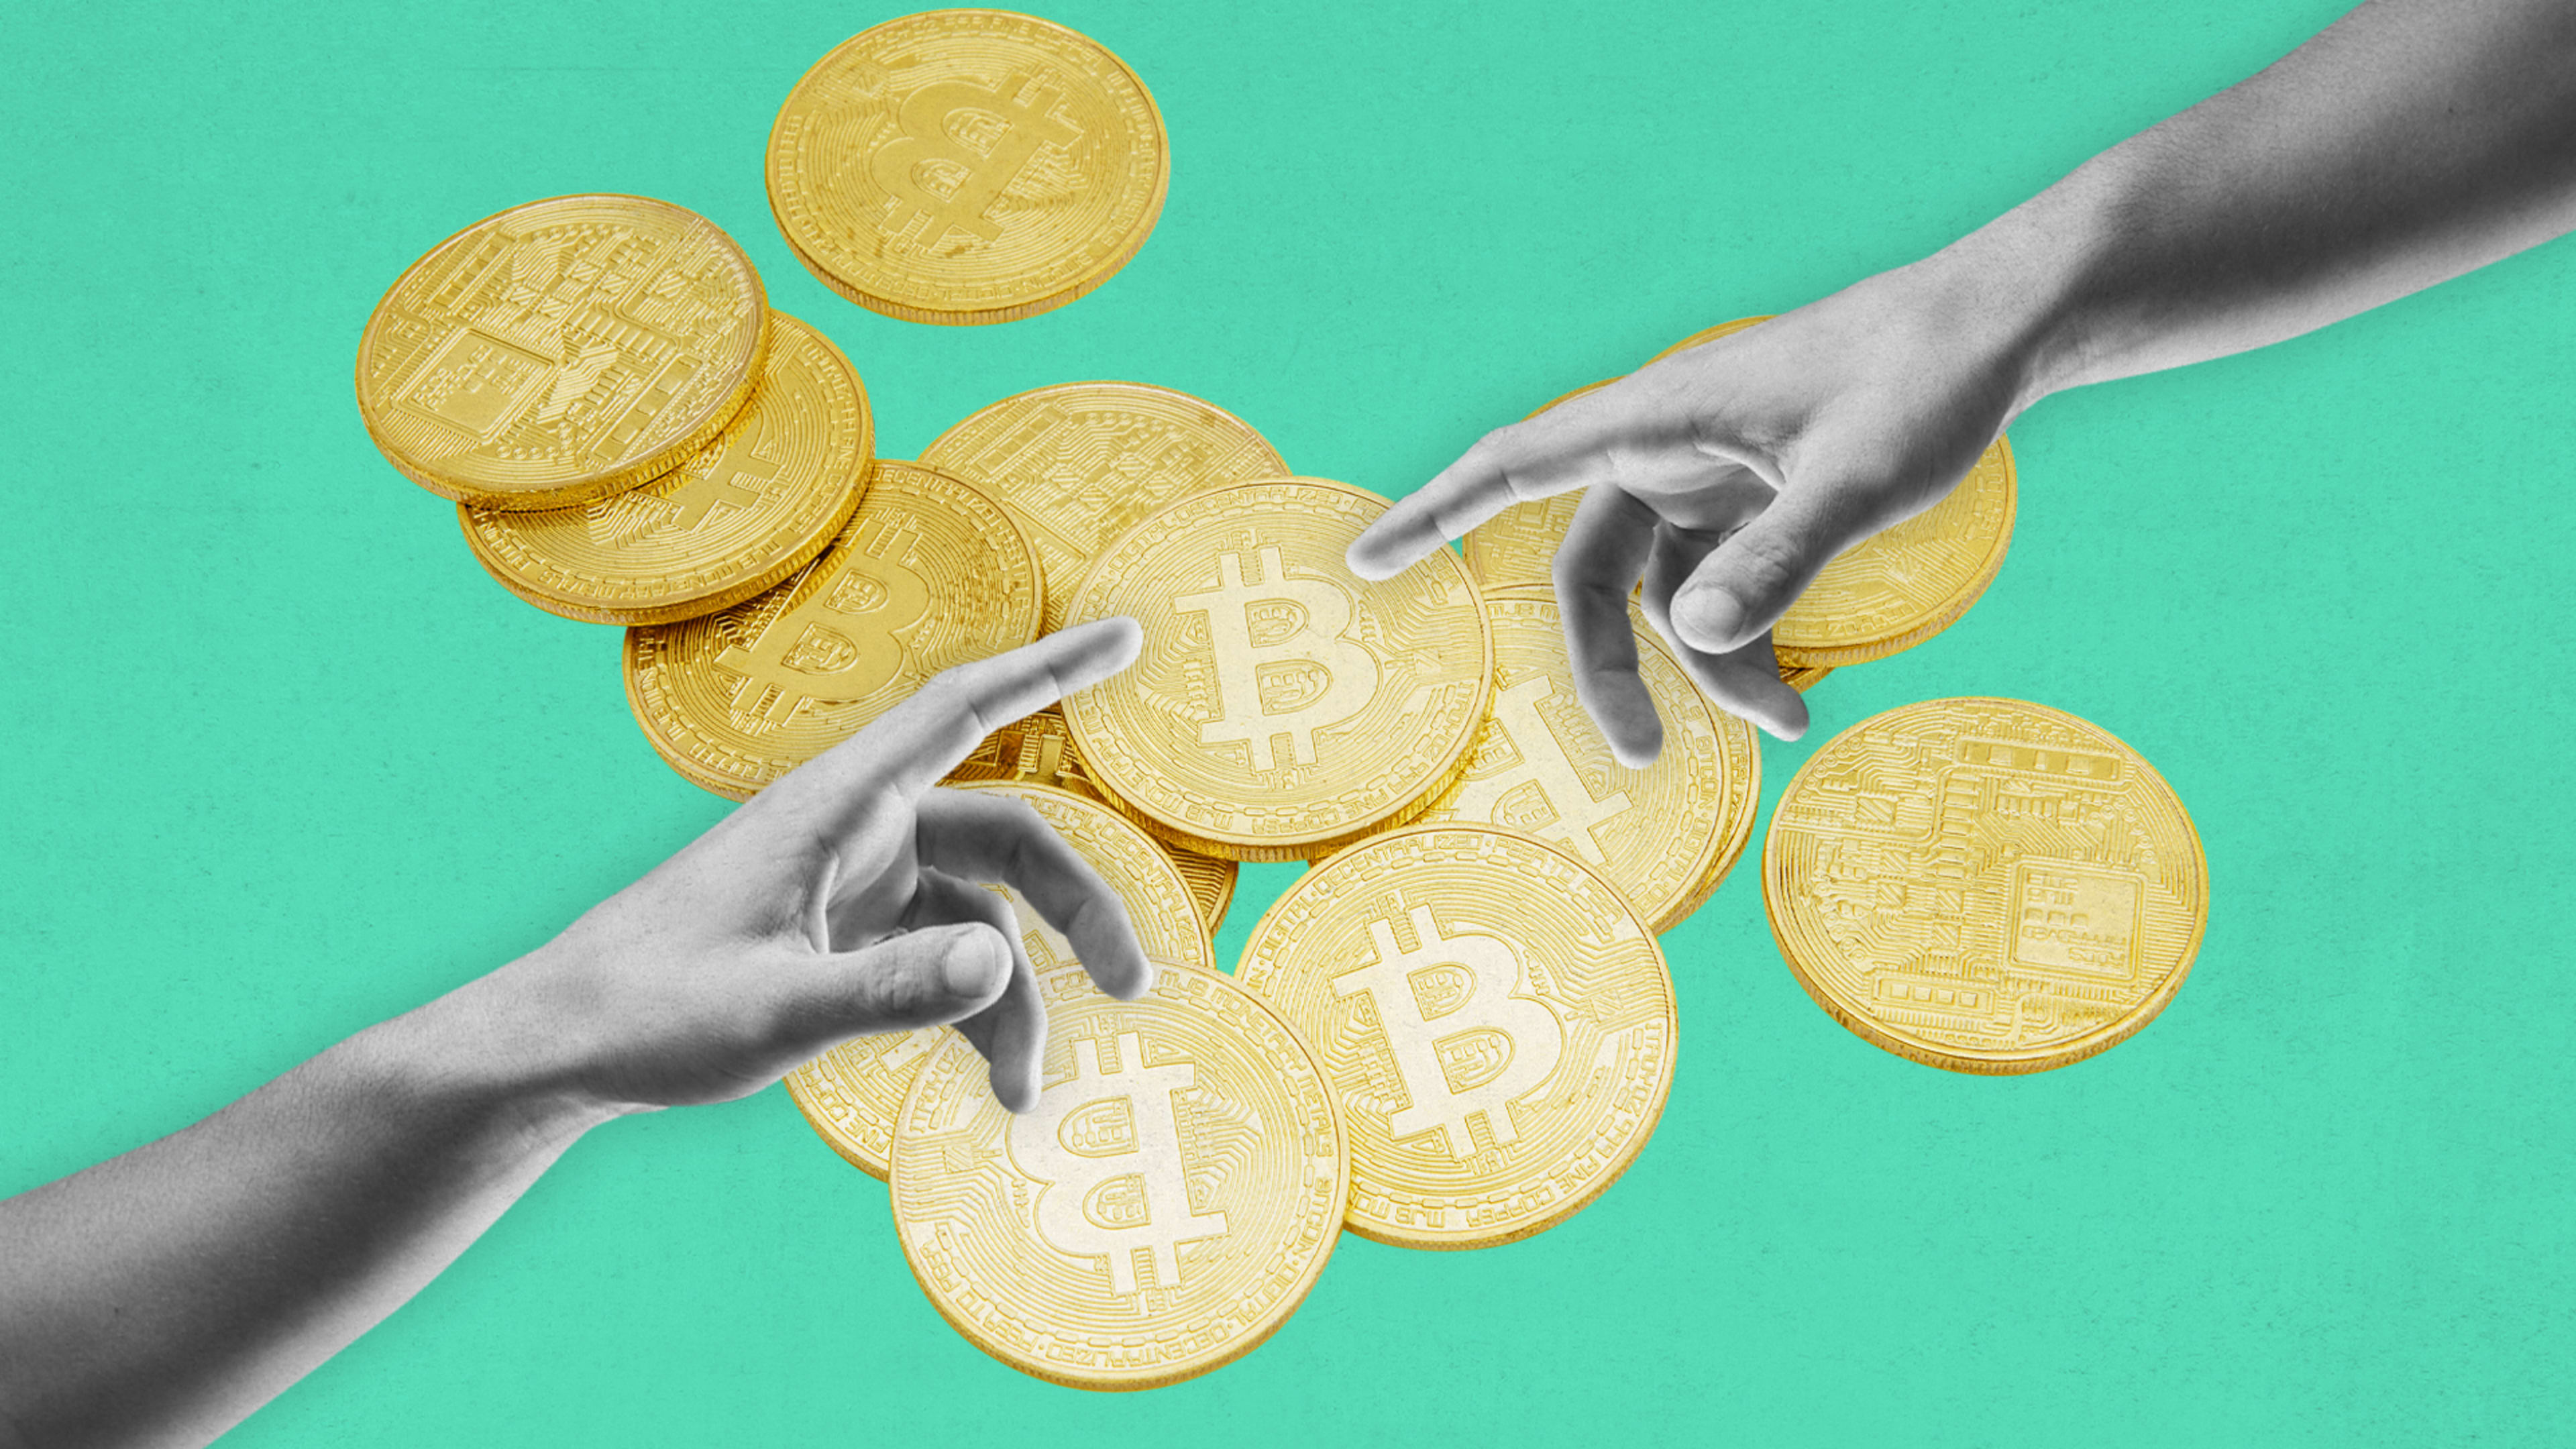 Report: Morgan Stanley will let wealthy clients access bitcoin funds, due to popular demand